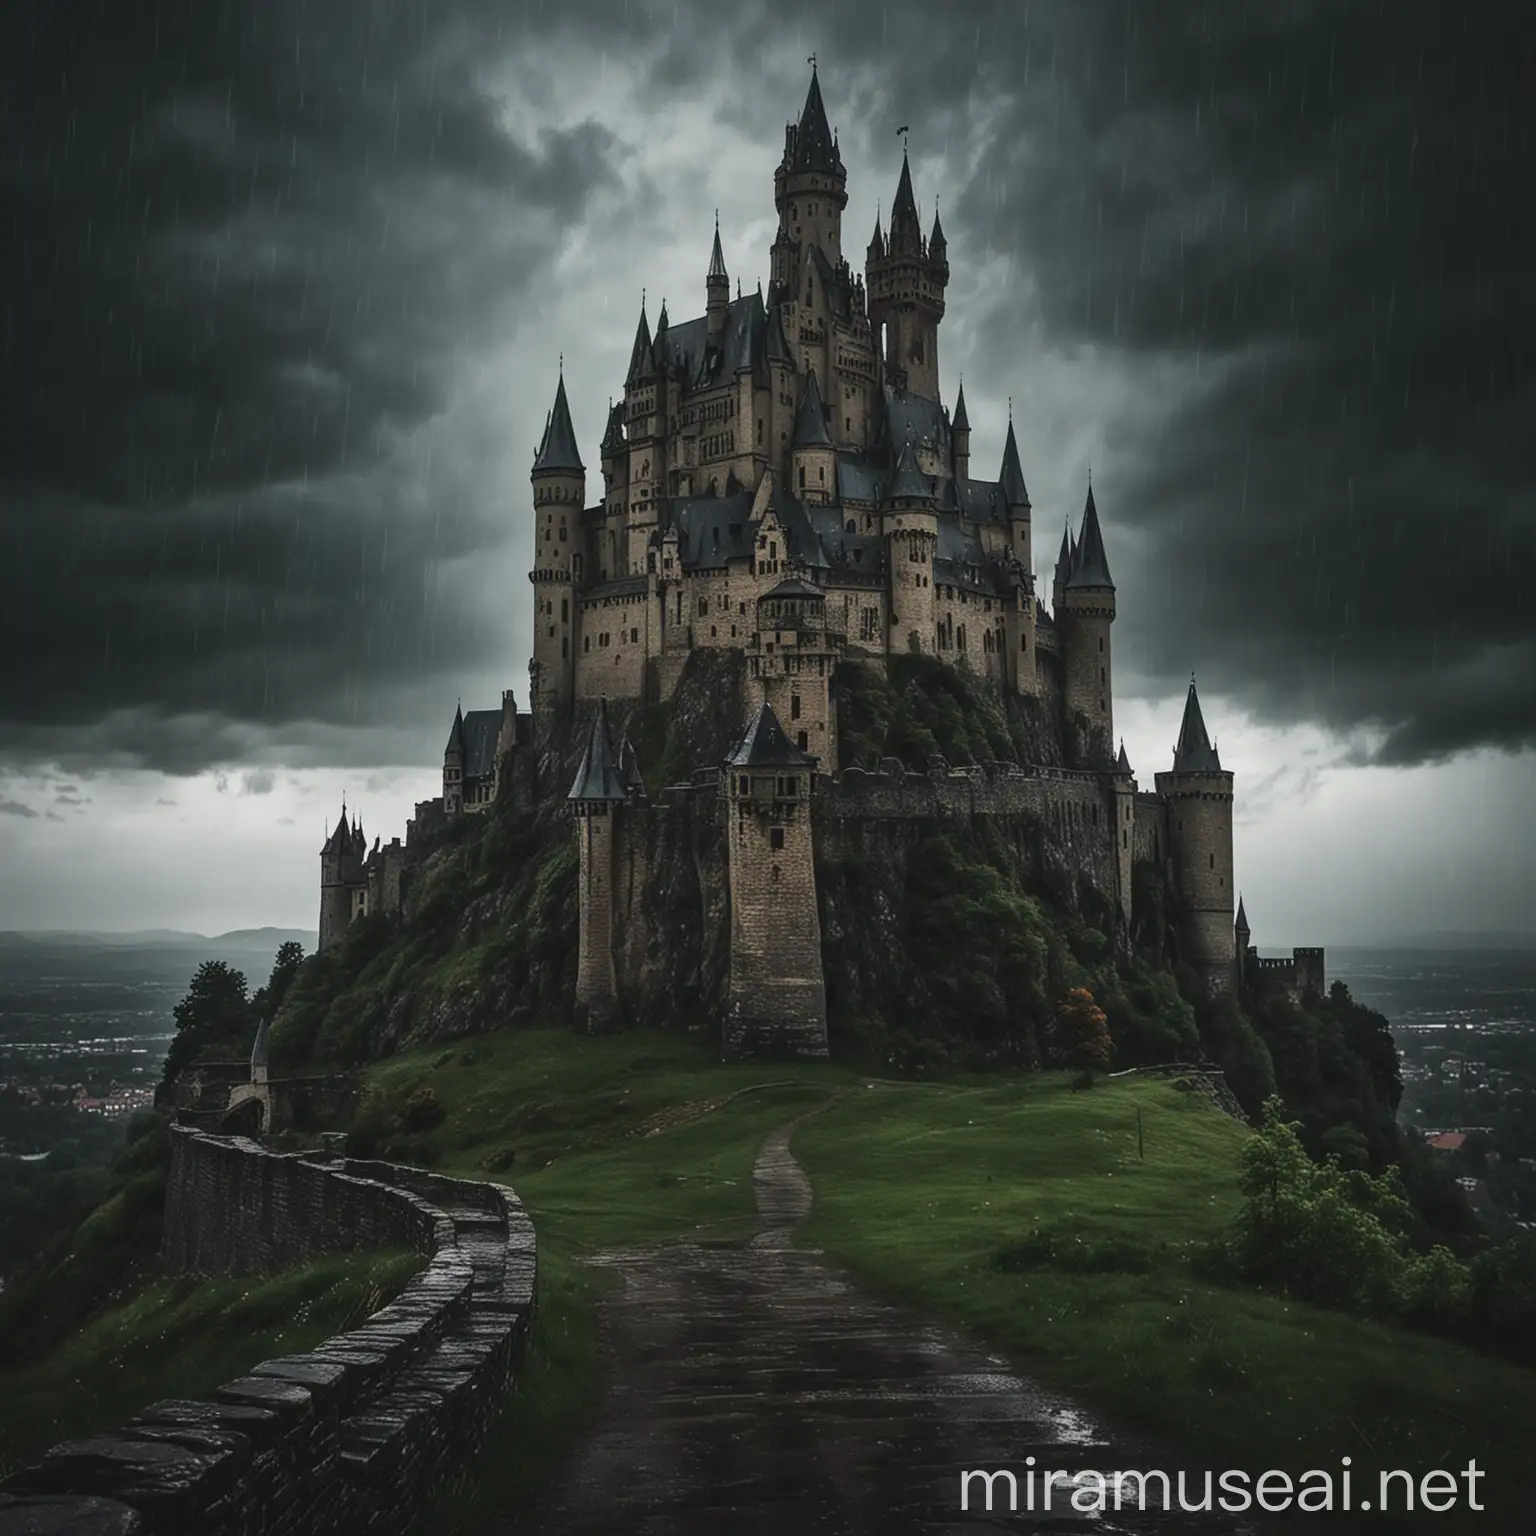 A big castle in a dark and rainy weather